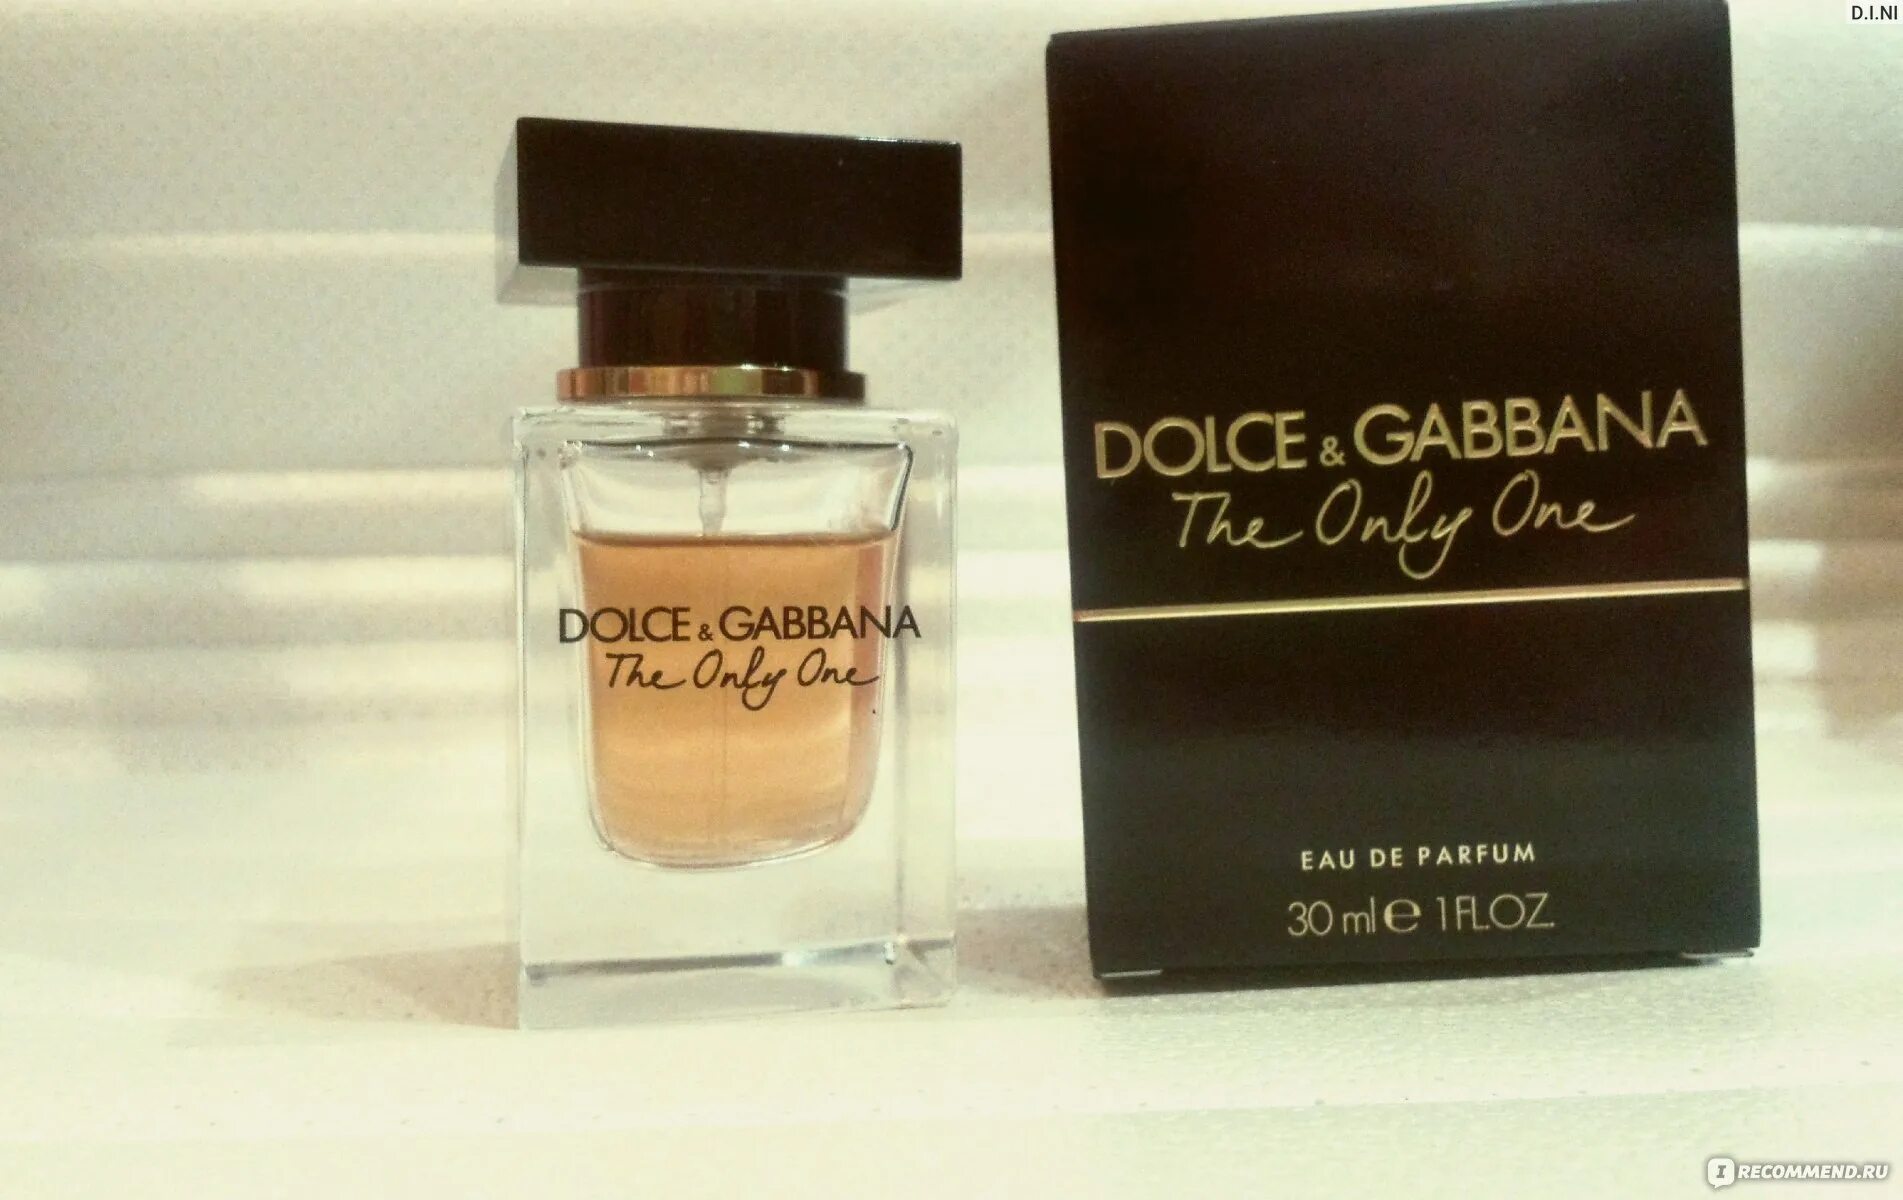 D&G the only one Дольче Габбана. Духи Дольче Габбана the only one. Dolce Gabbana the only one женские 10 мл. Духи Дольче Габбана зе Онли Ван.